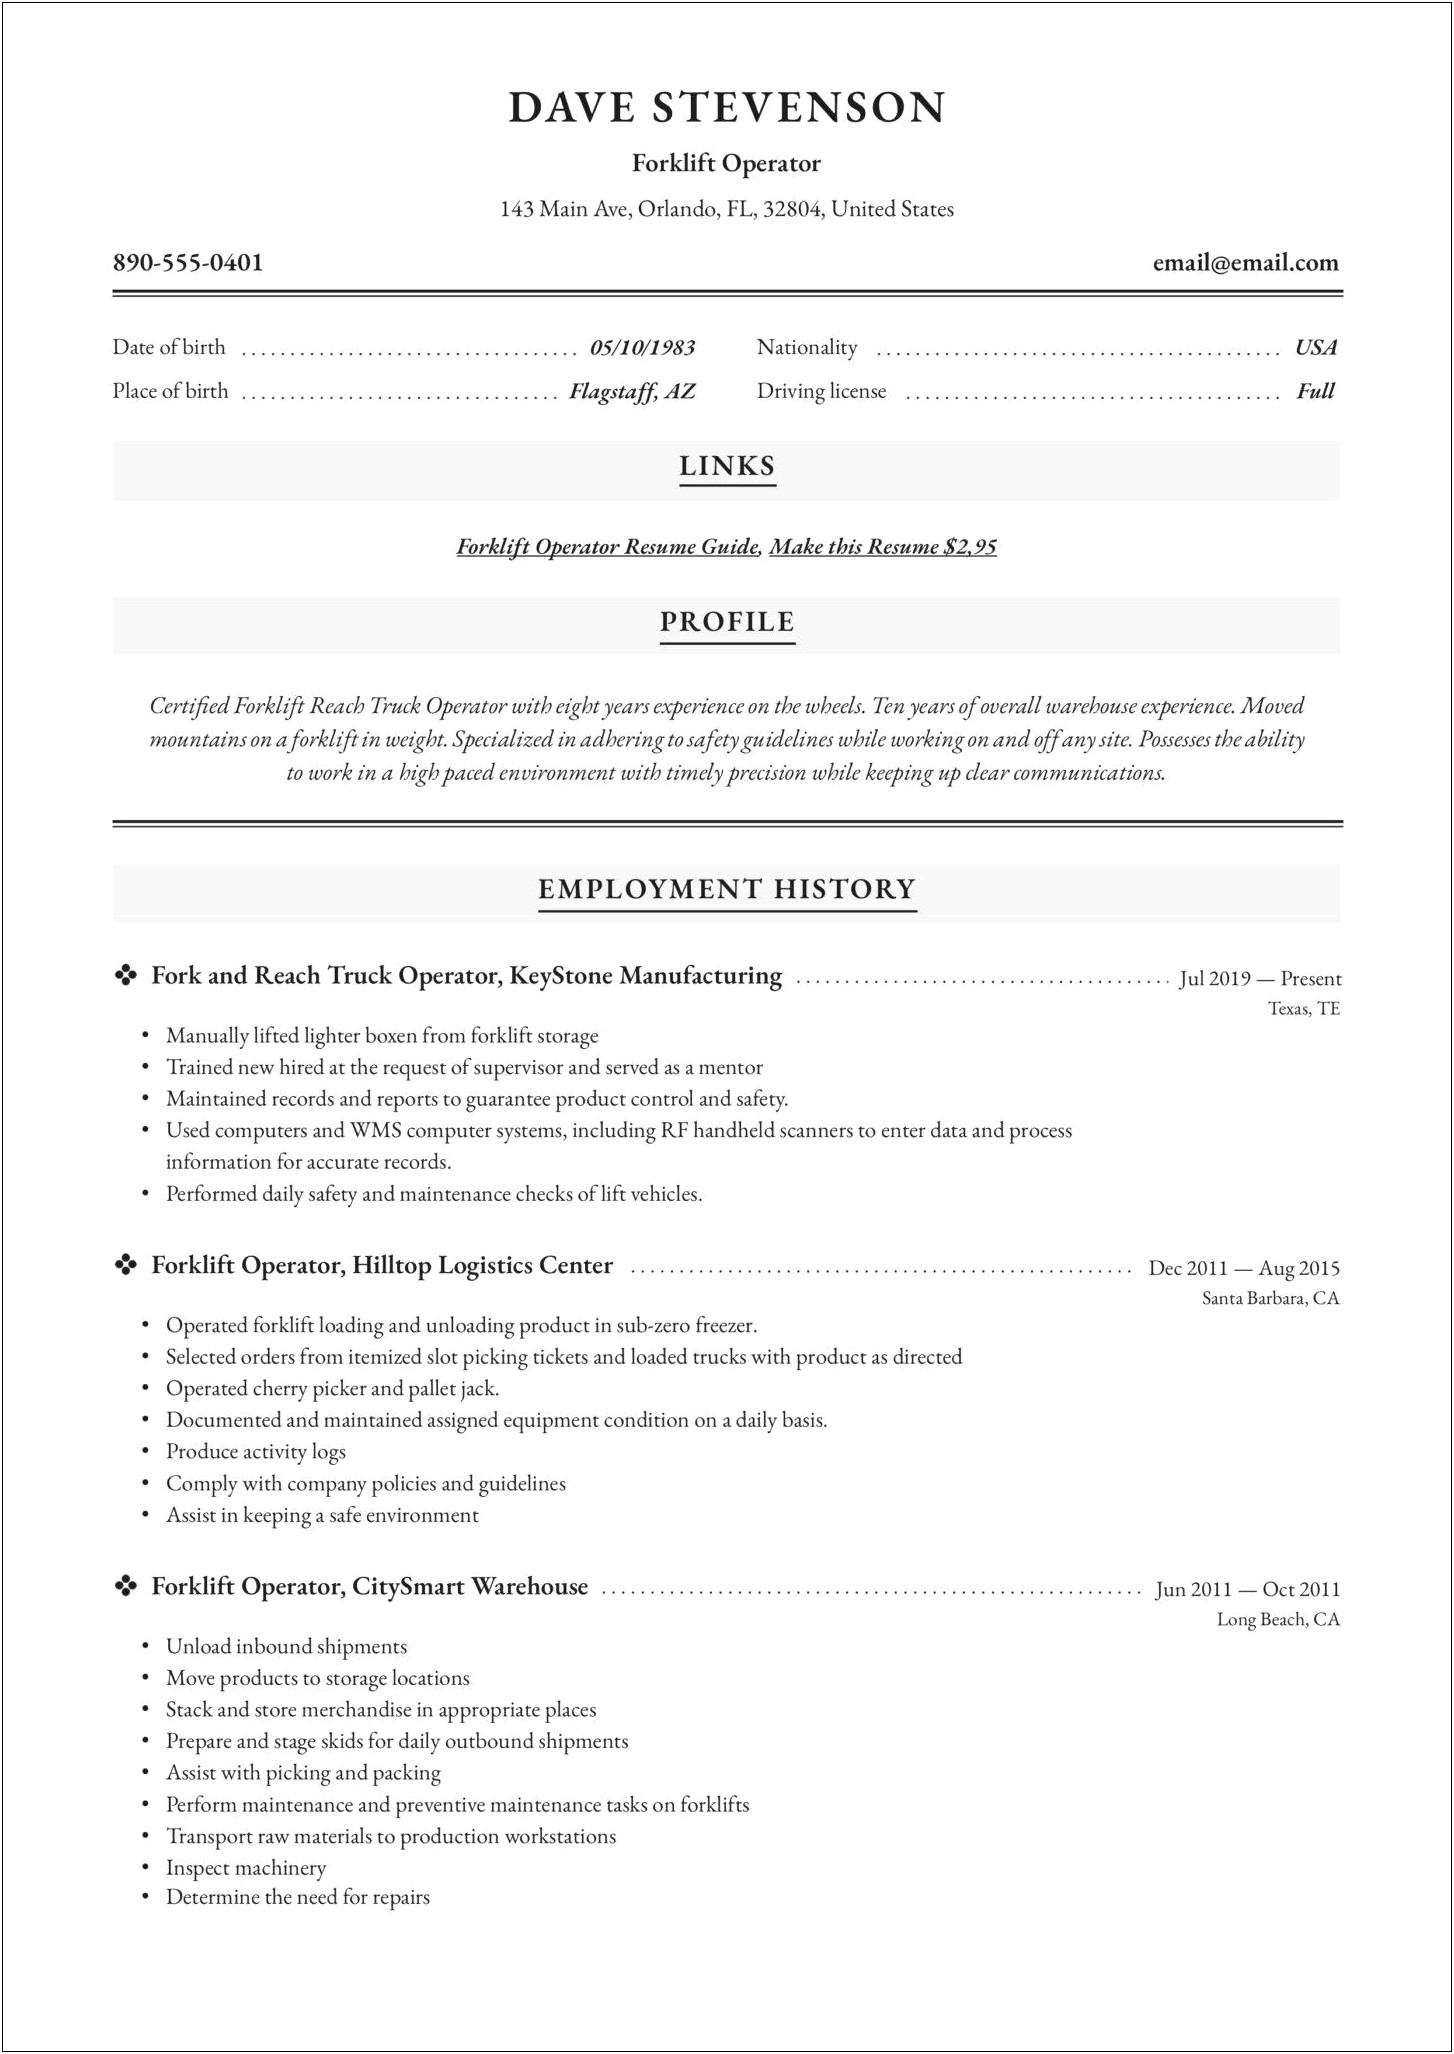 Resume Summary For Warehouse Worker And Forklift Operator